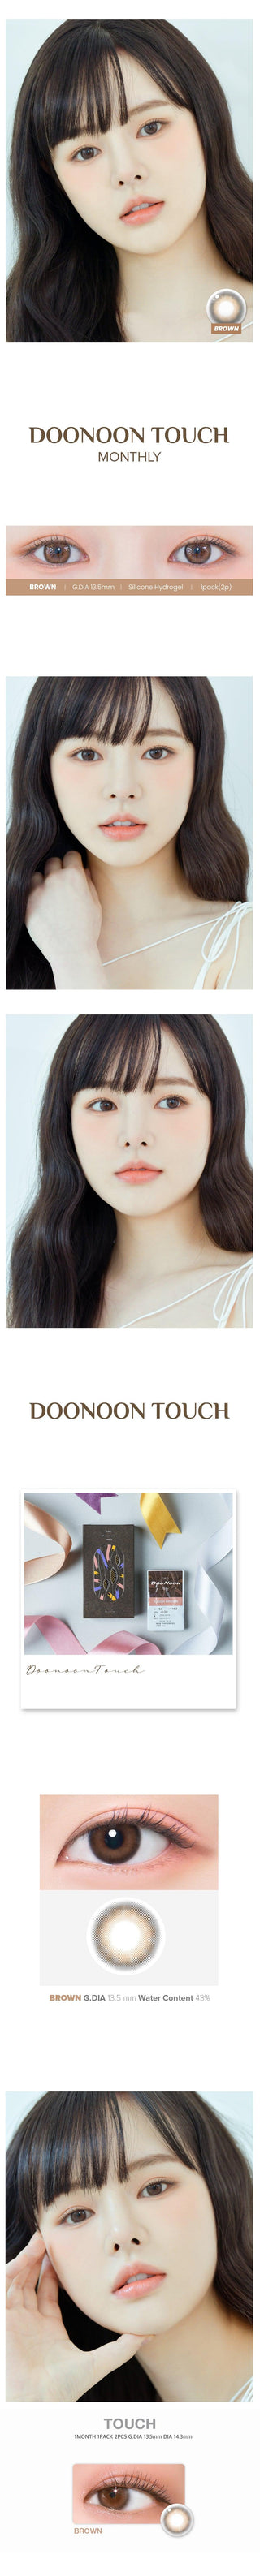 Variety of DooNoon Touch Brown contact lens colors displayed, with closeups of an eye wearing the contact lens colors, and with a model wearing the contact lens colors showing realistic eye-enlarging effect from various angles.